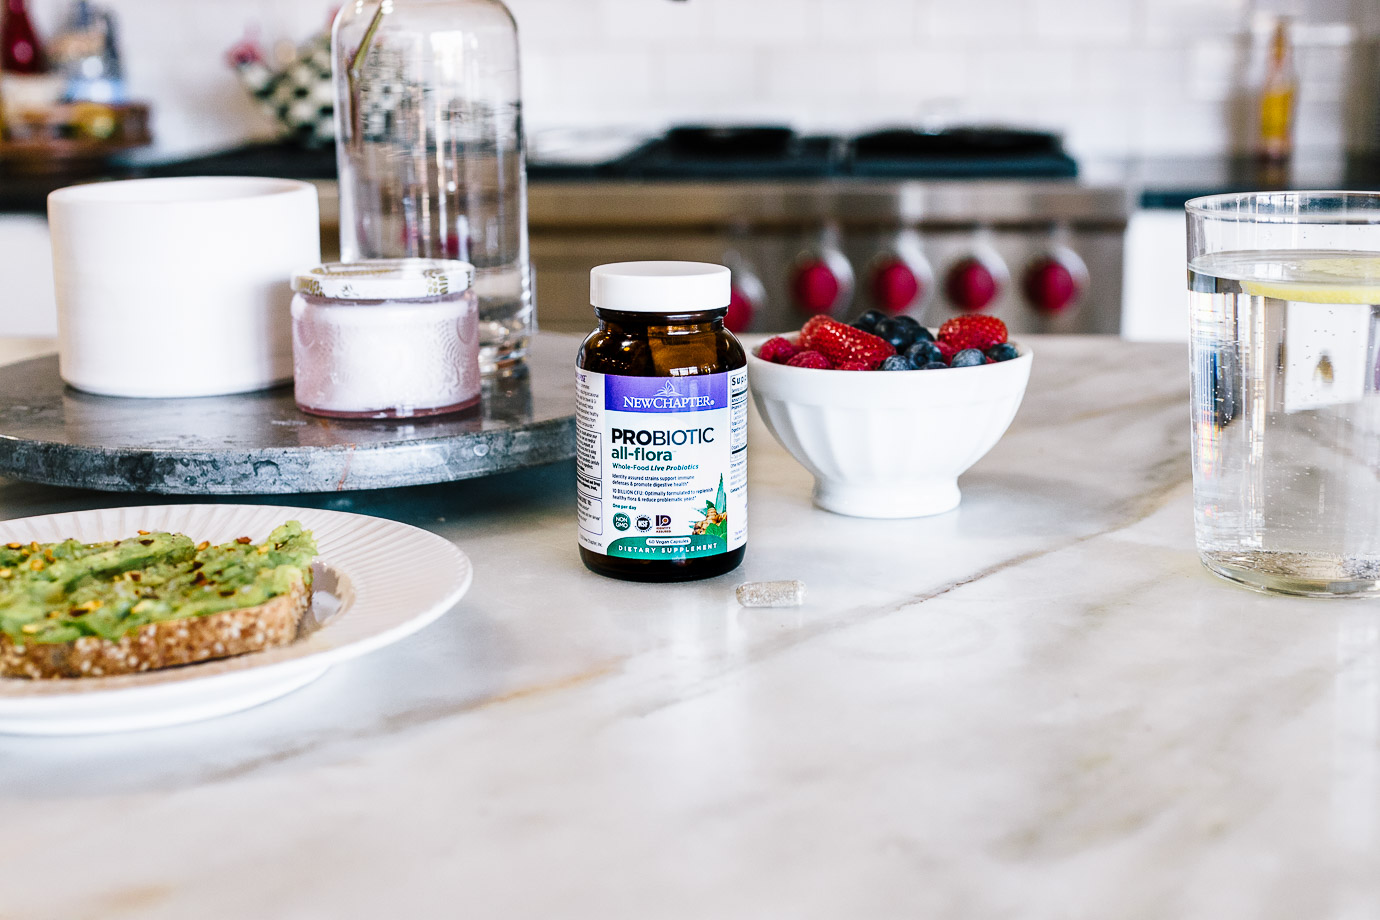 New Chapter probiotic on kitchen counter